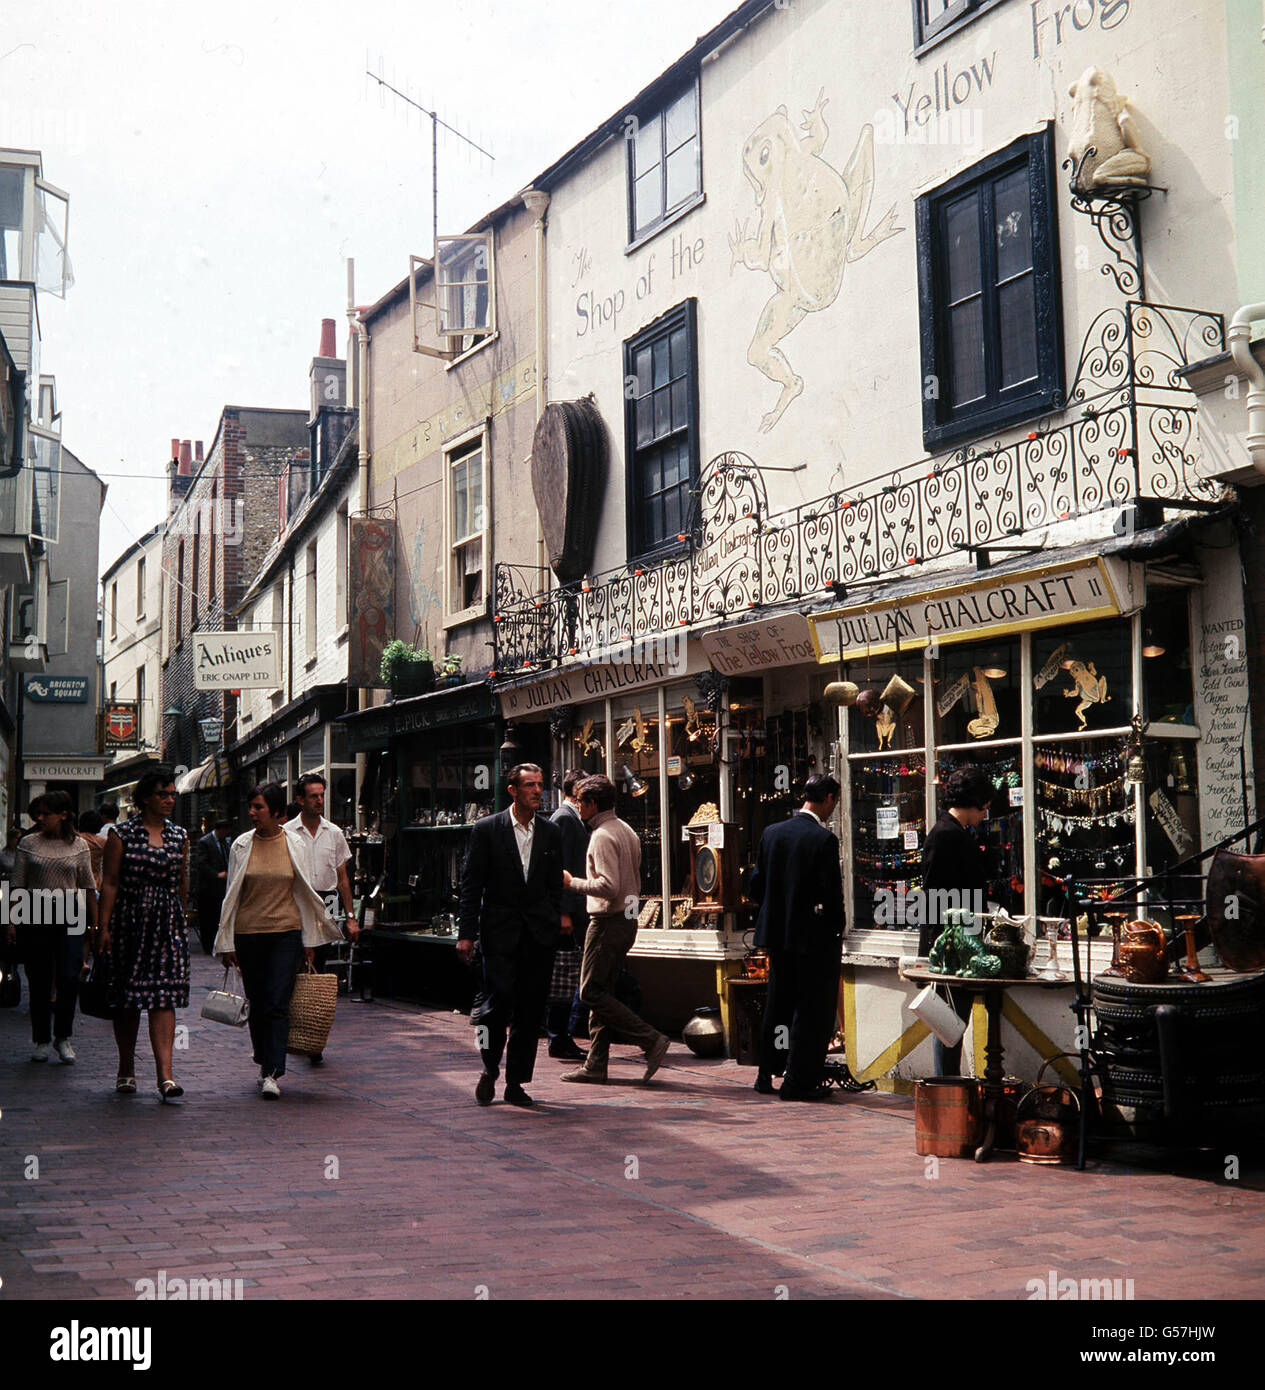 A scene in The Lanes, Brighton, Sussex, an area with passageways containing antique and bric-a-brac shops. Stock Photo